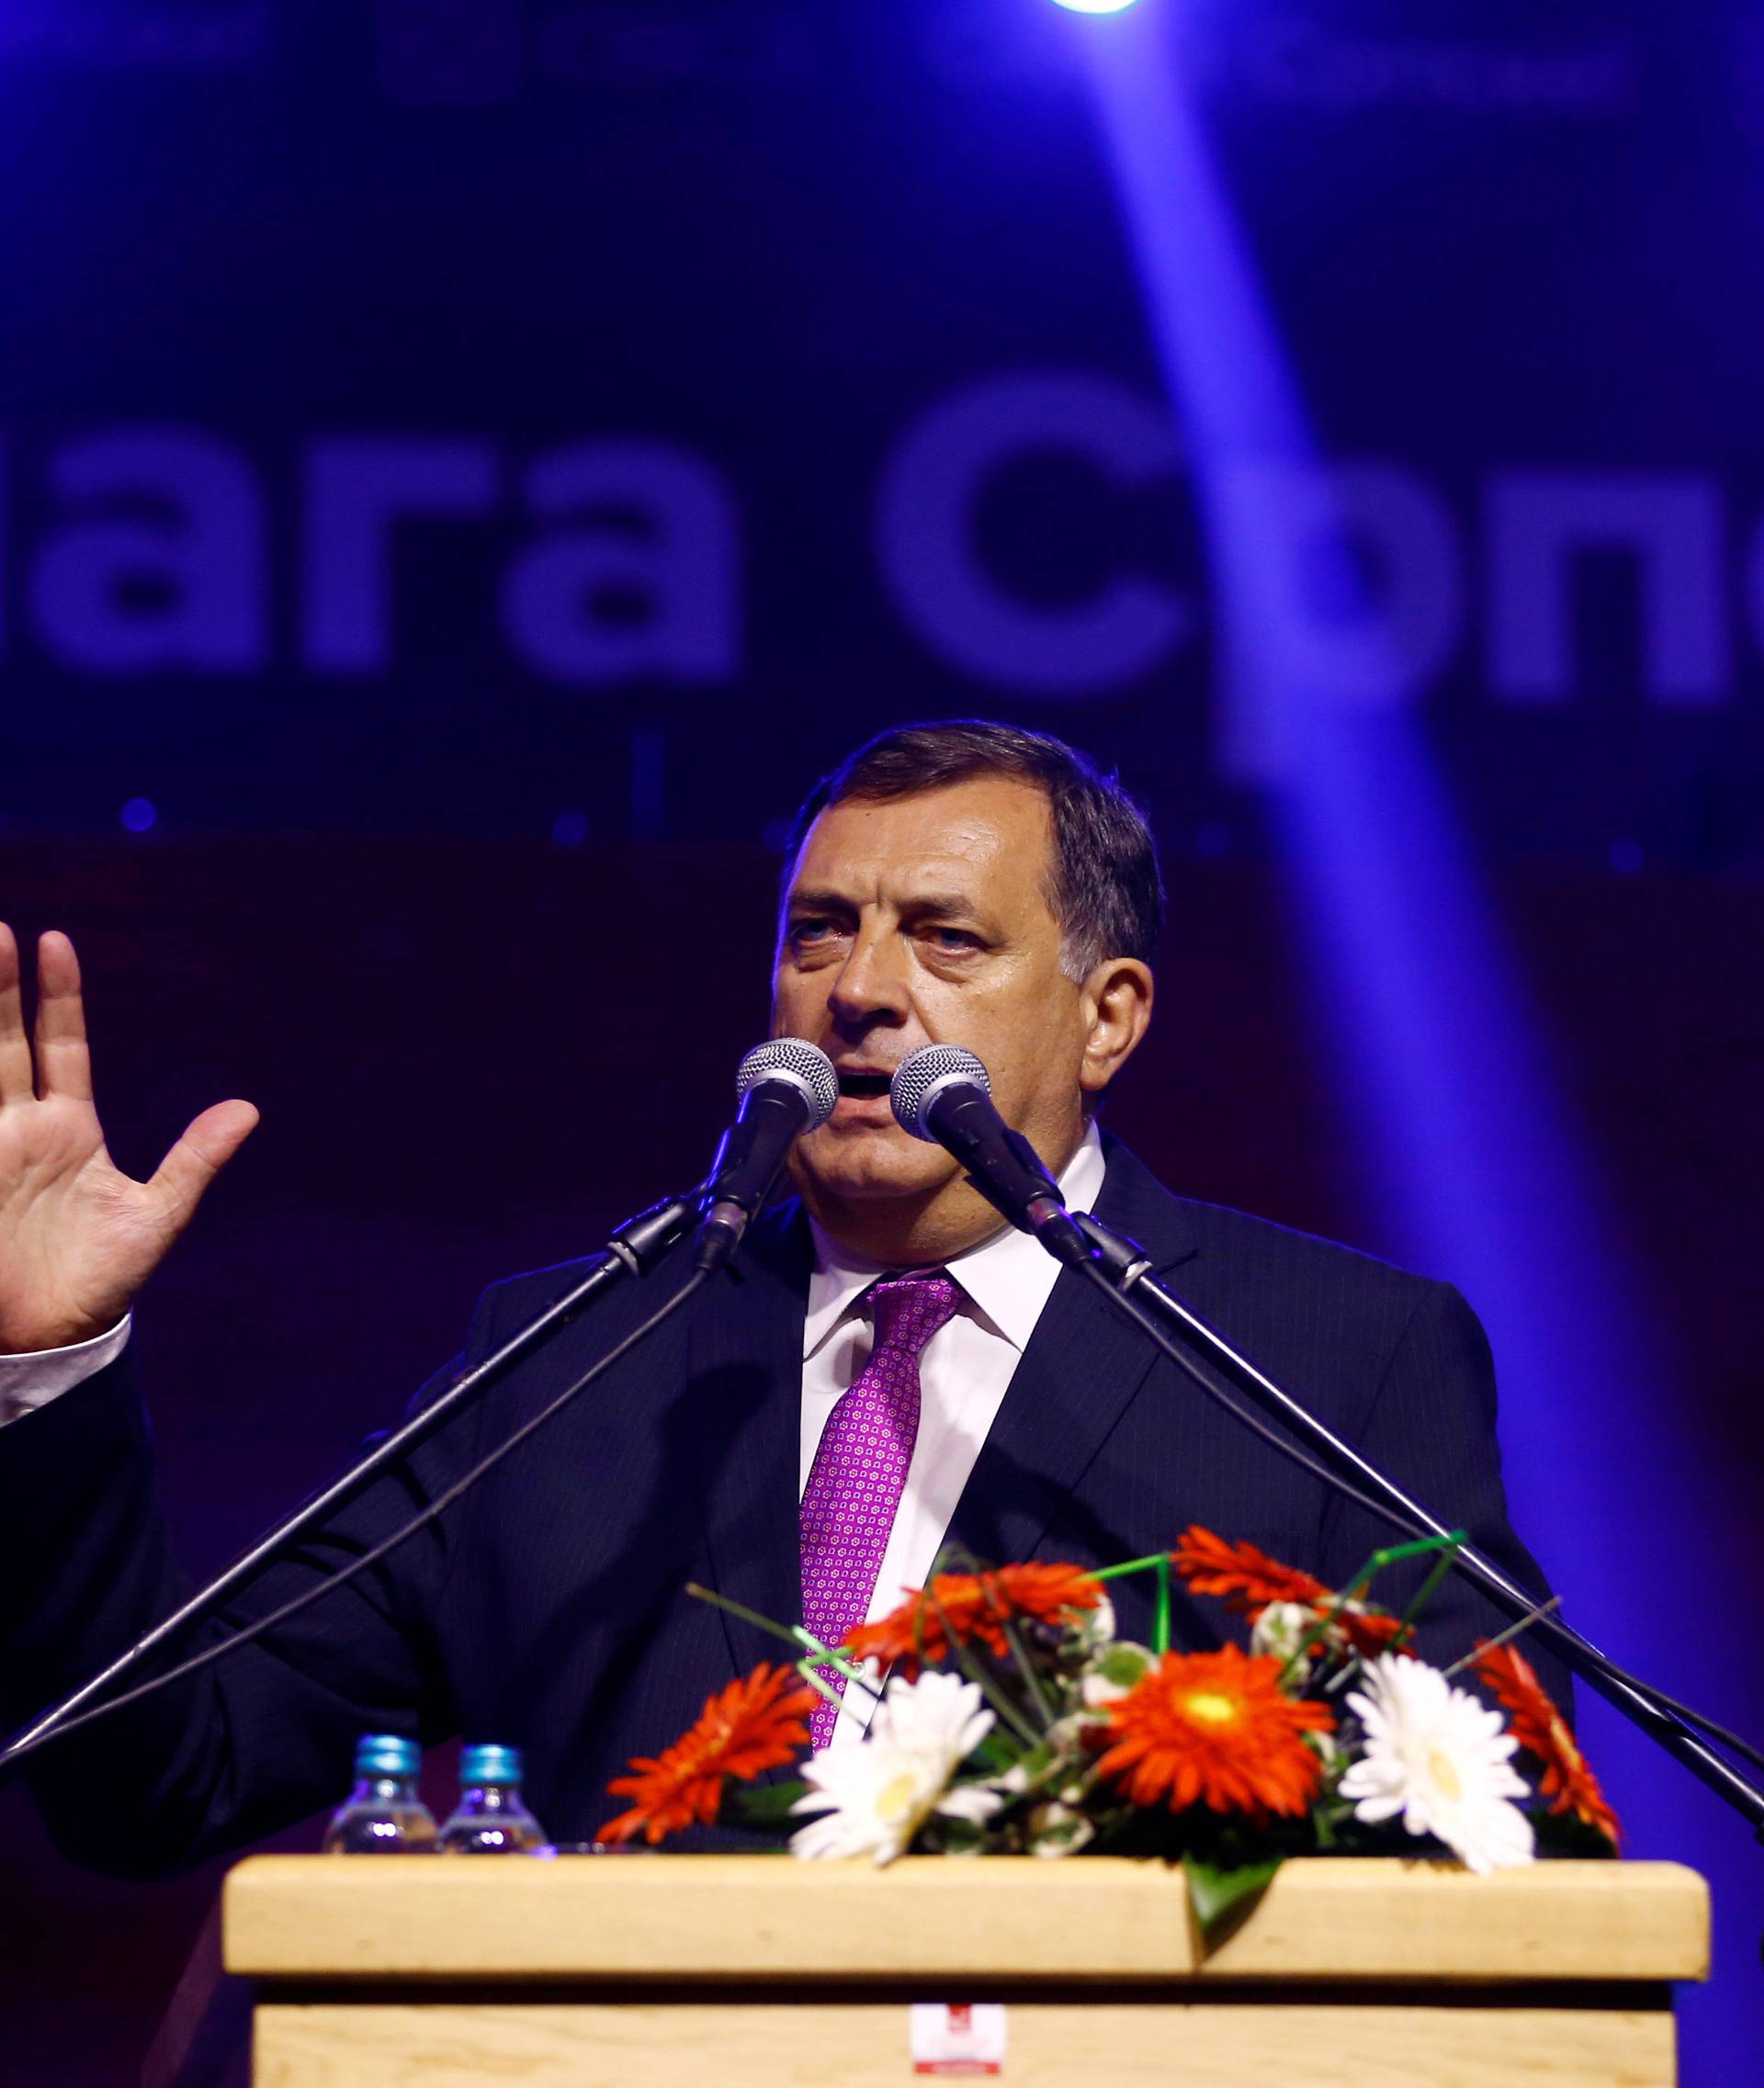 Milorad Dodik, President of Republika Srpska, speaks after the results of a referendum over a disputed national holiday during an election rally in Pale